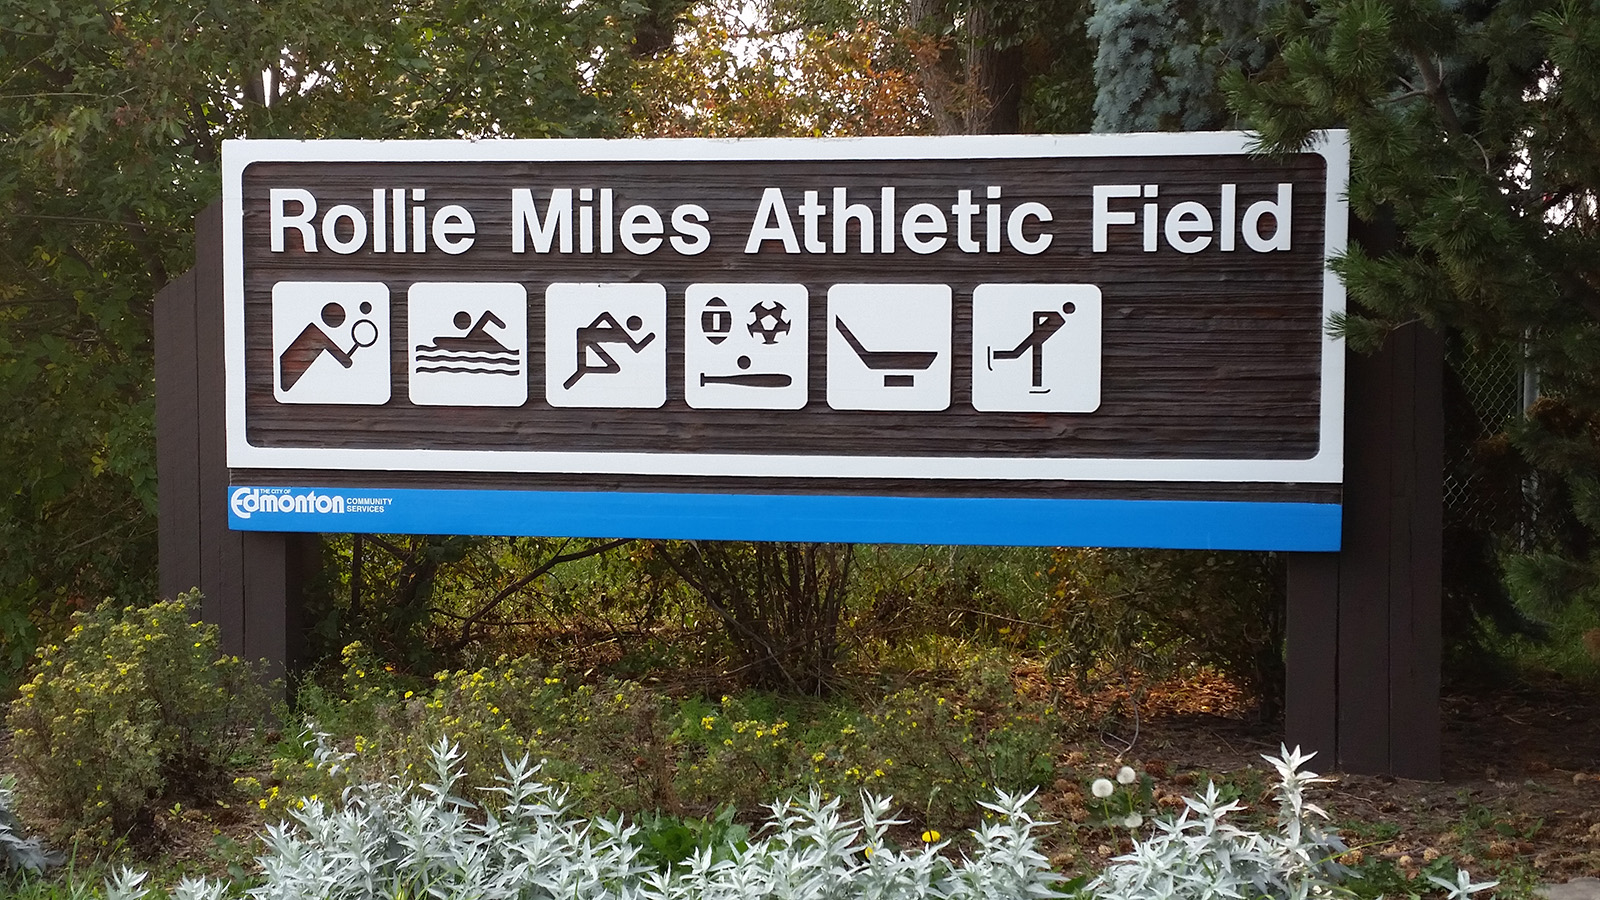 Sign at entrance to Rollie Miles Athletic Field